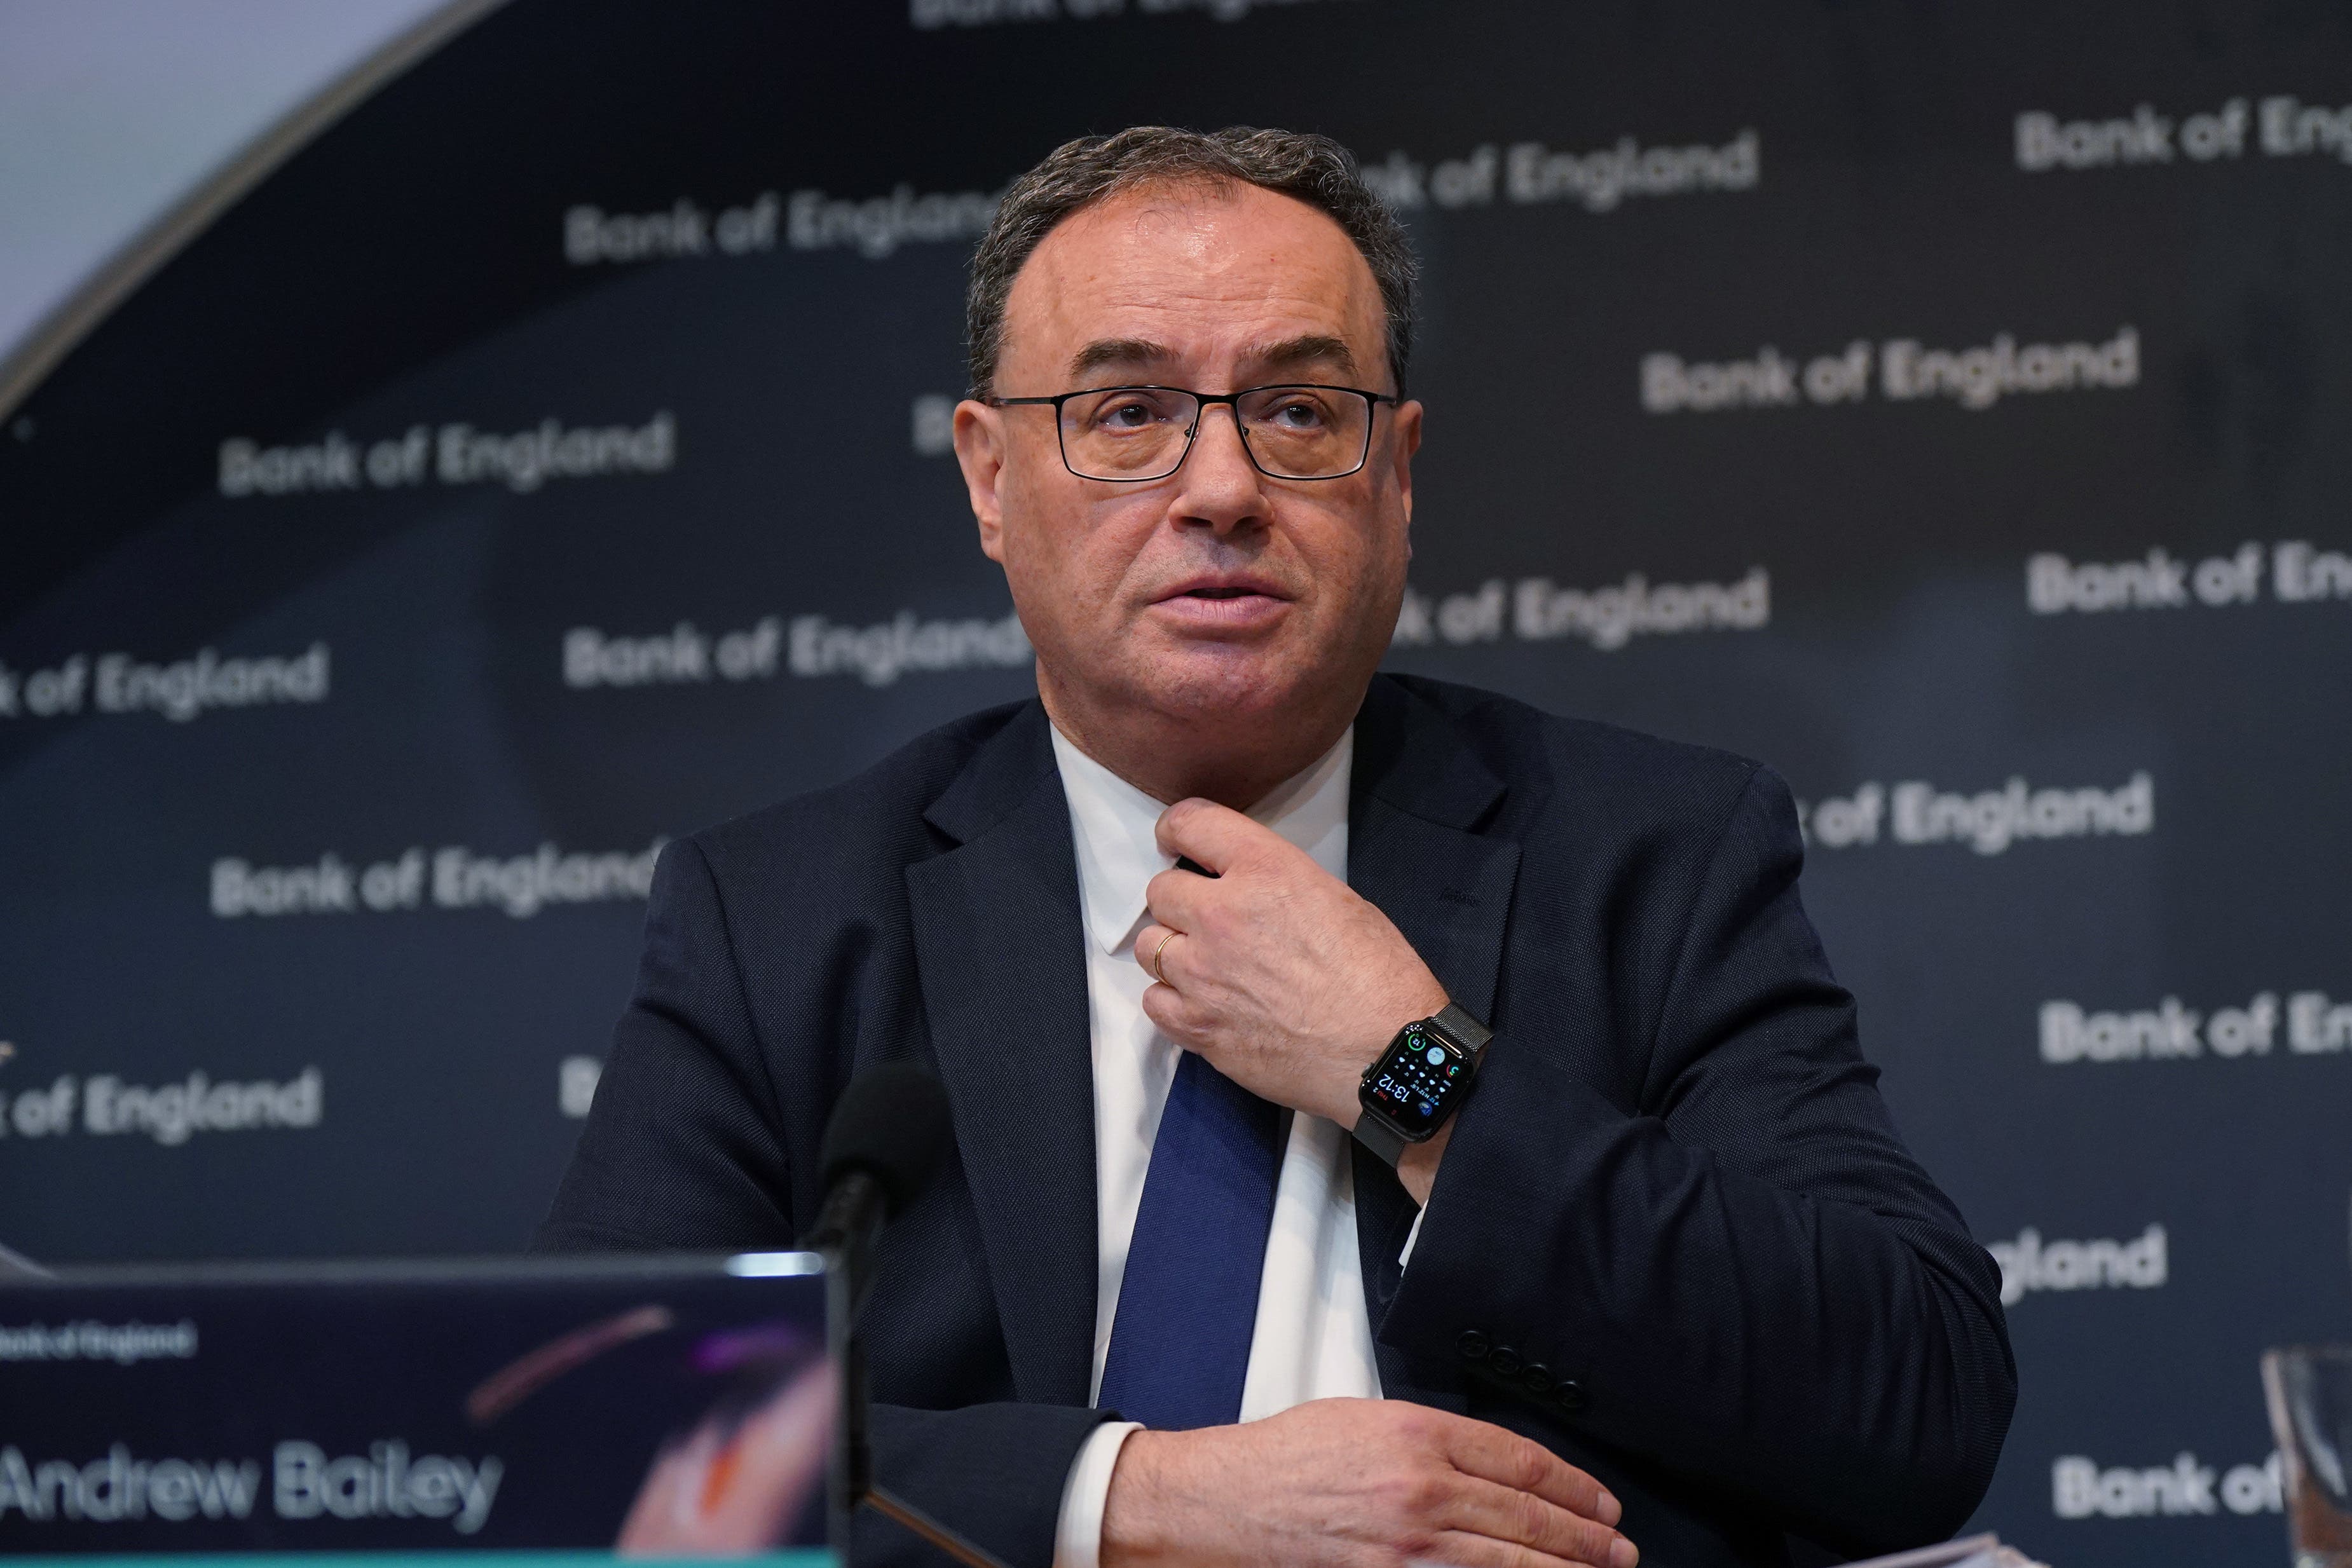 Andrew Bailey said the end of furlough in September 2021 had been expected to bring a jump in unemployment (Yui Mok/PA)